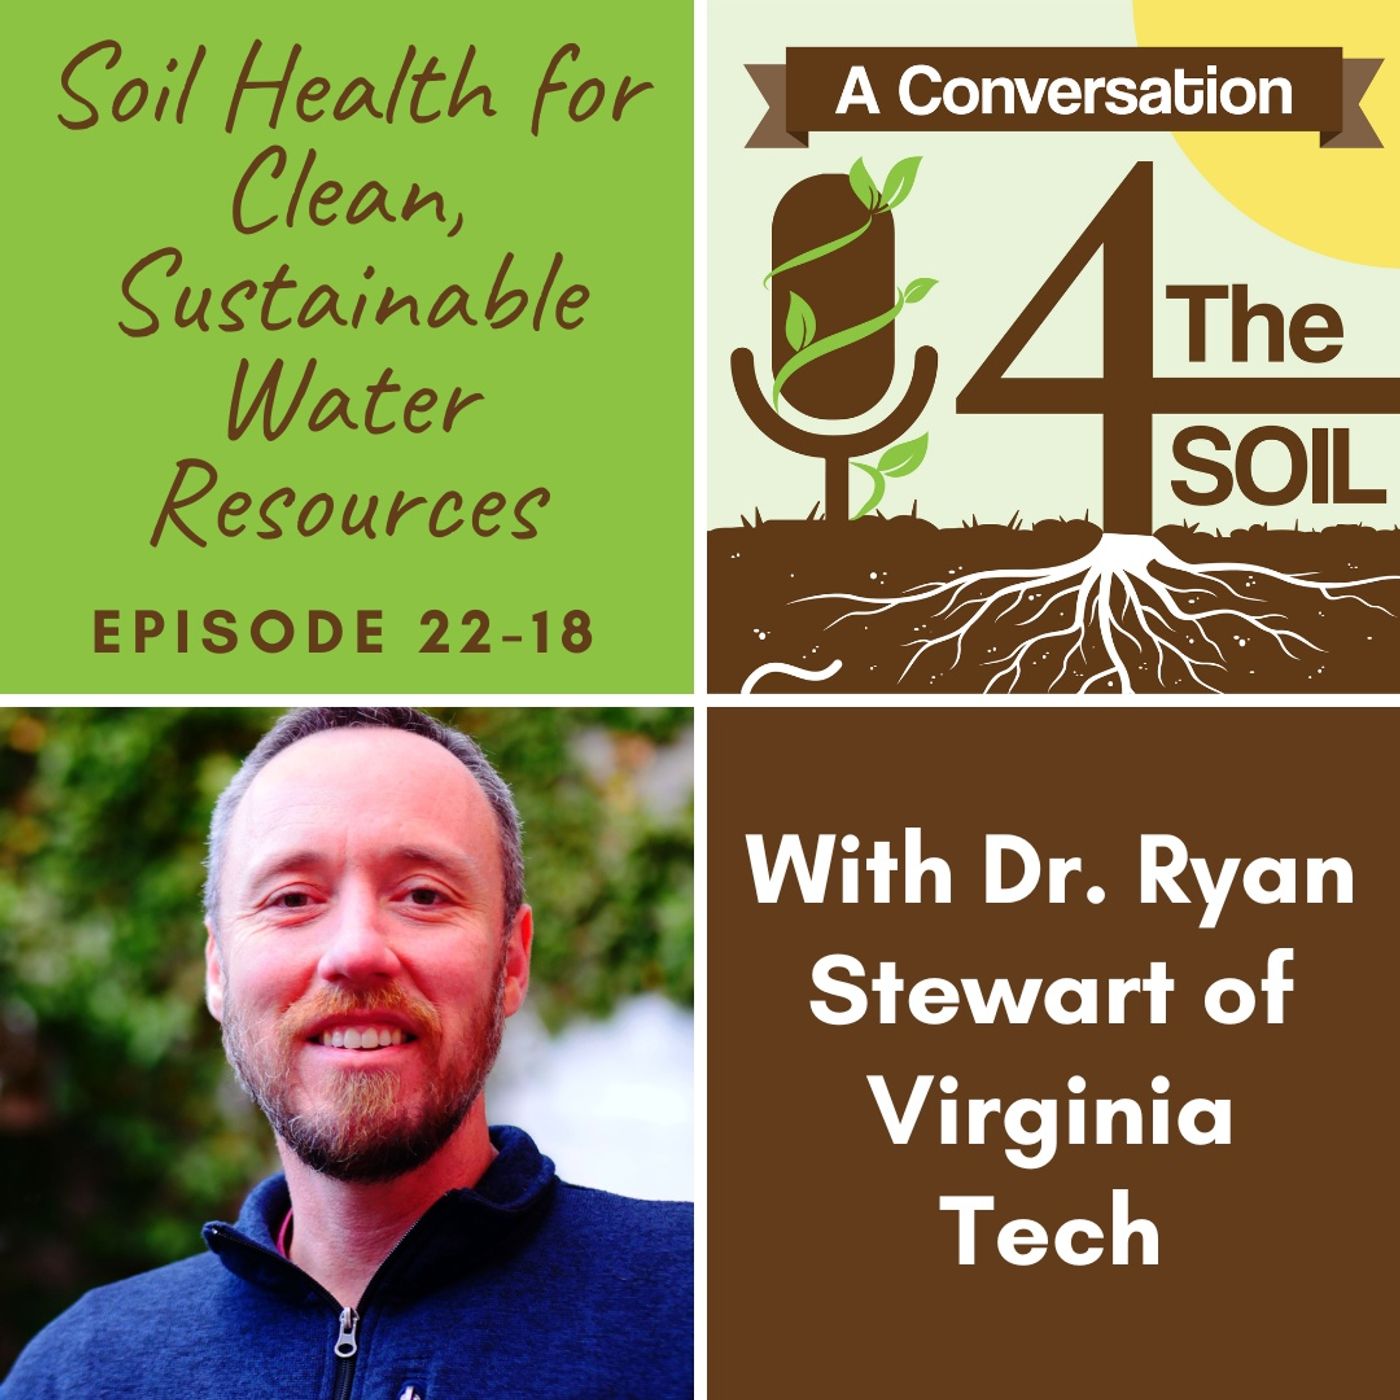 Episode 22- 18: Soil Health for Clean, Sustainable Water Resources with Dr. Ryan Stewart of Virginia Tech